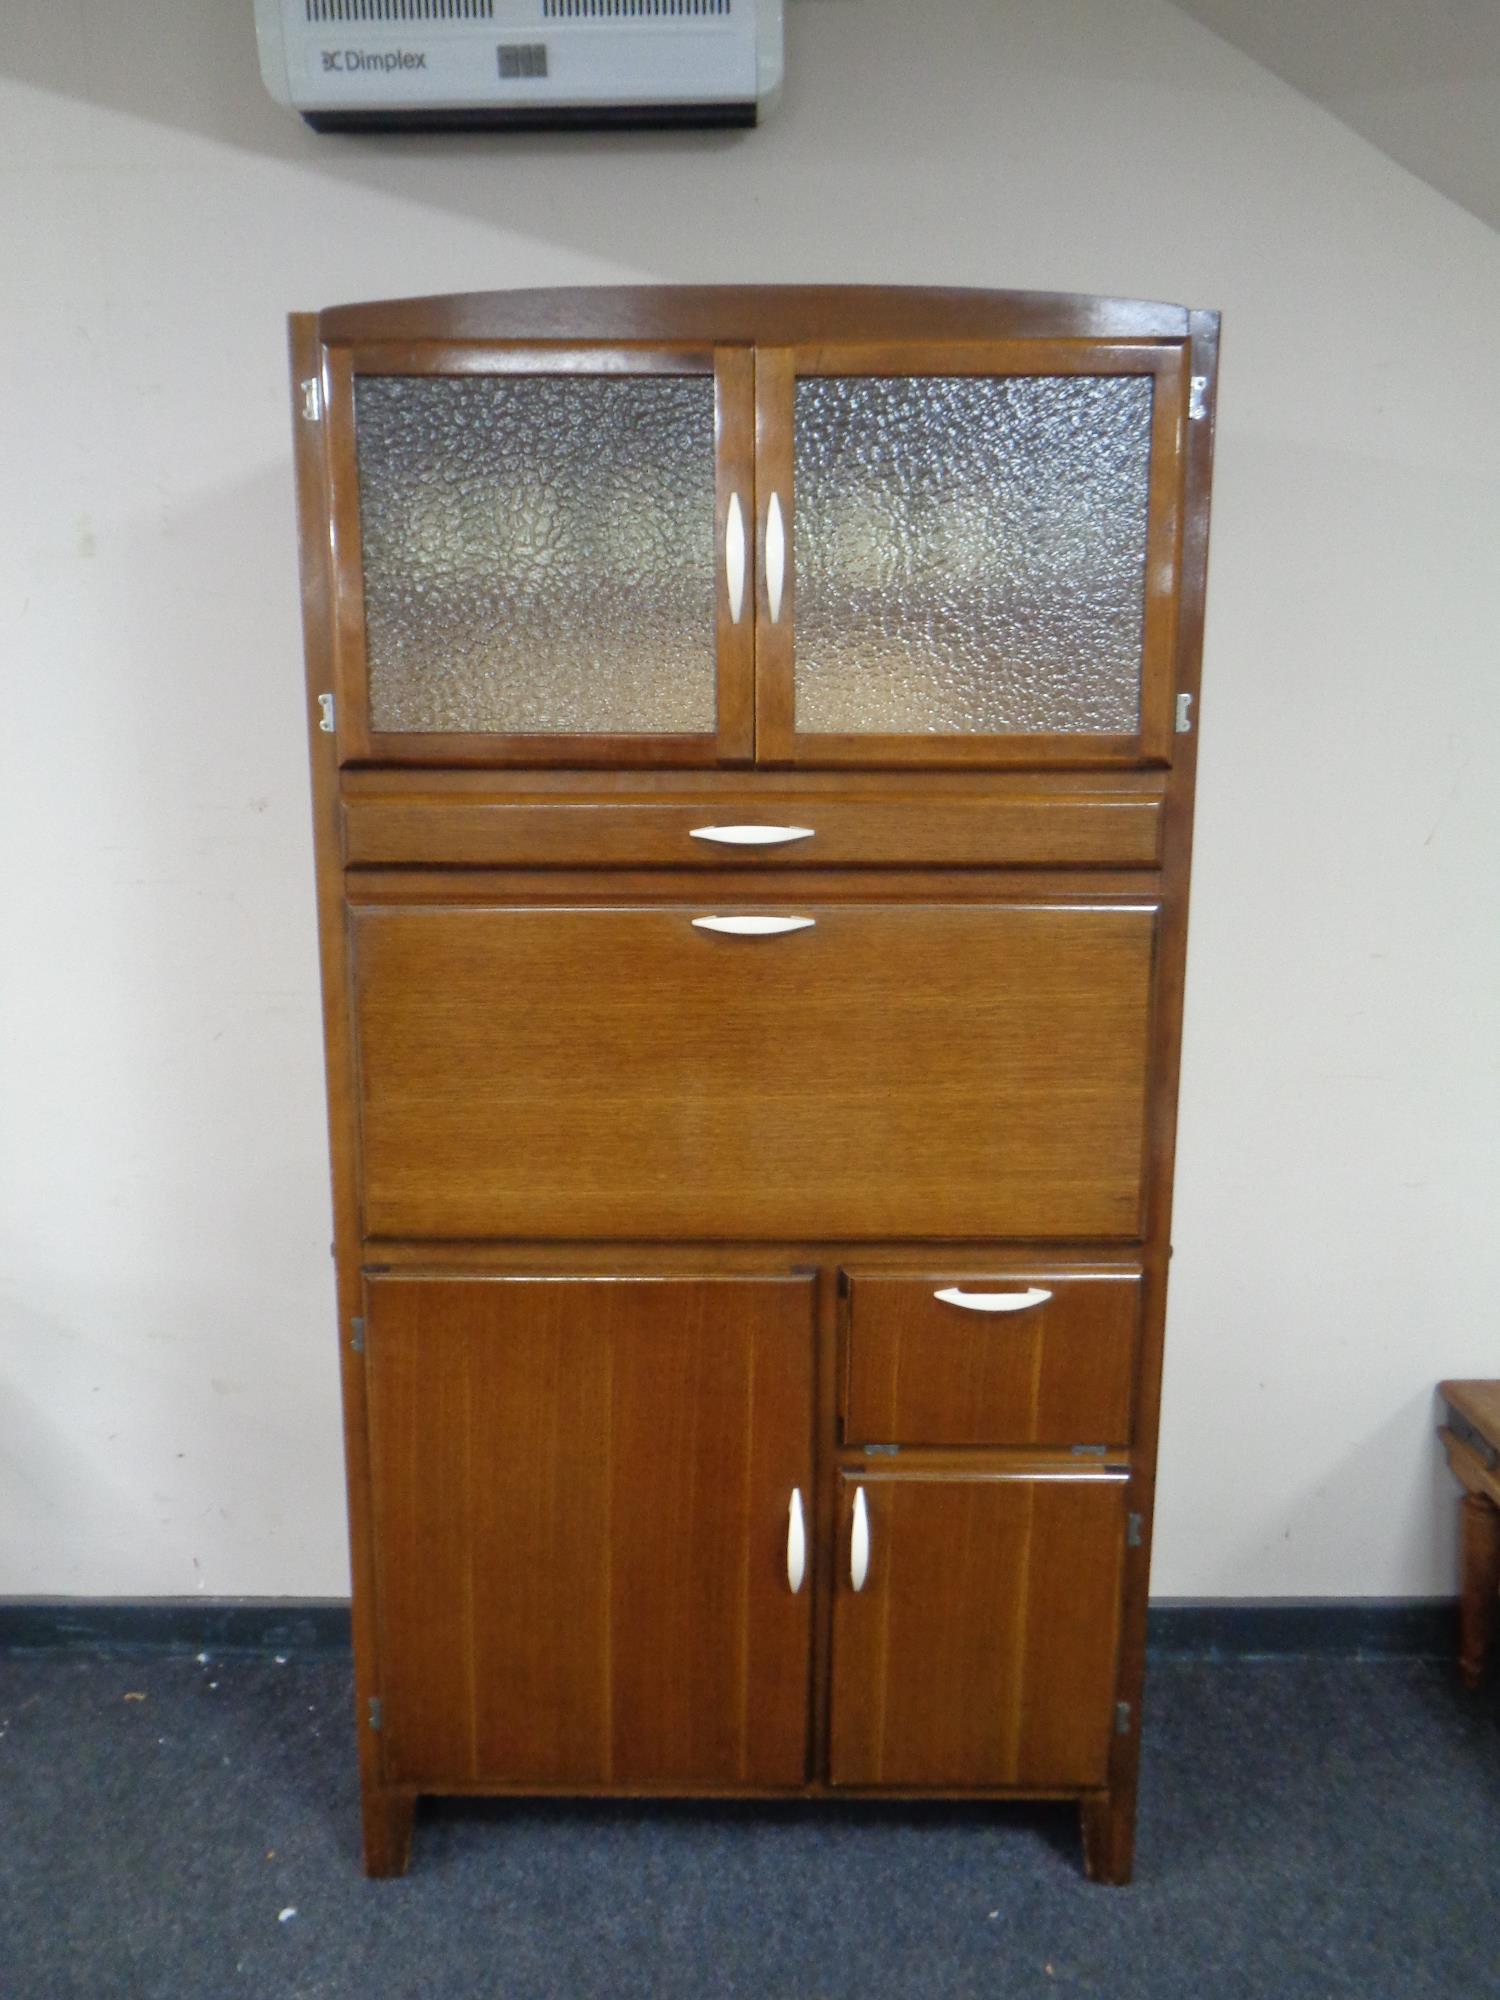 A mid-century kitchen cabinet with fitted interior.